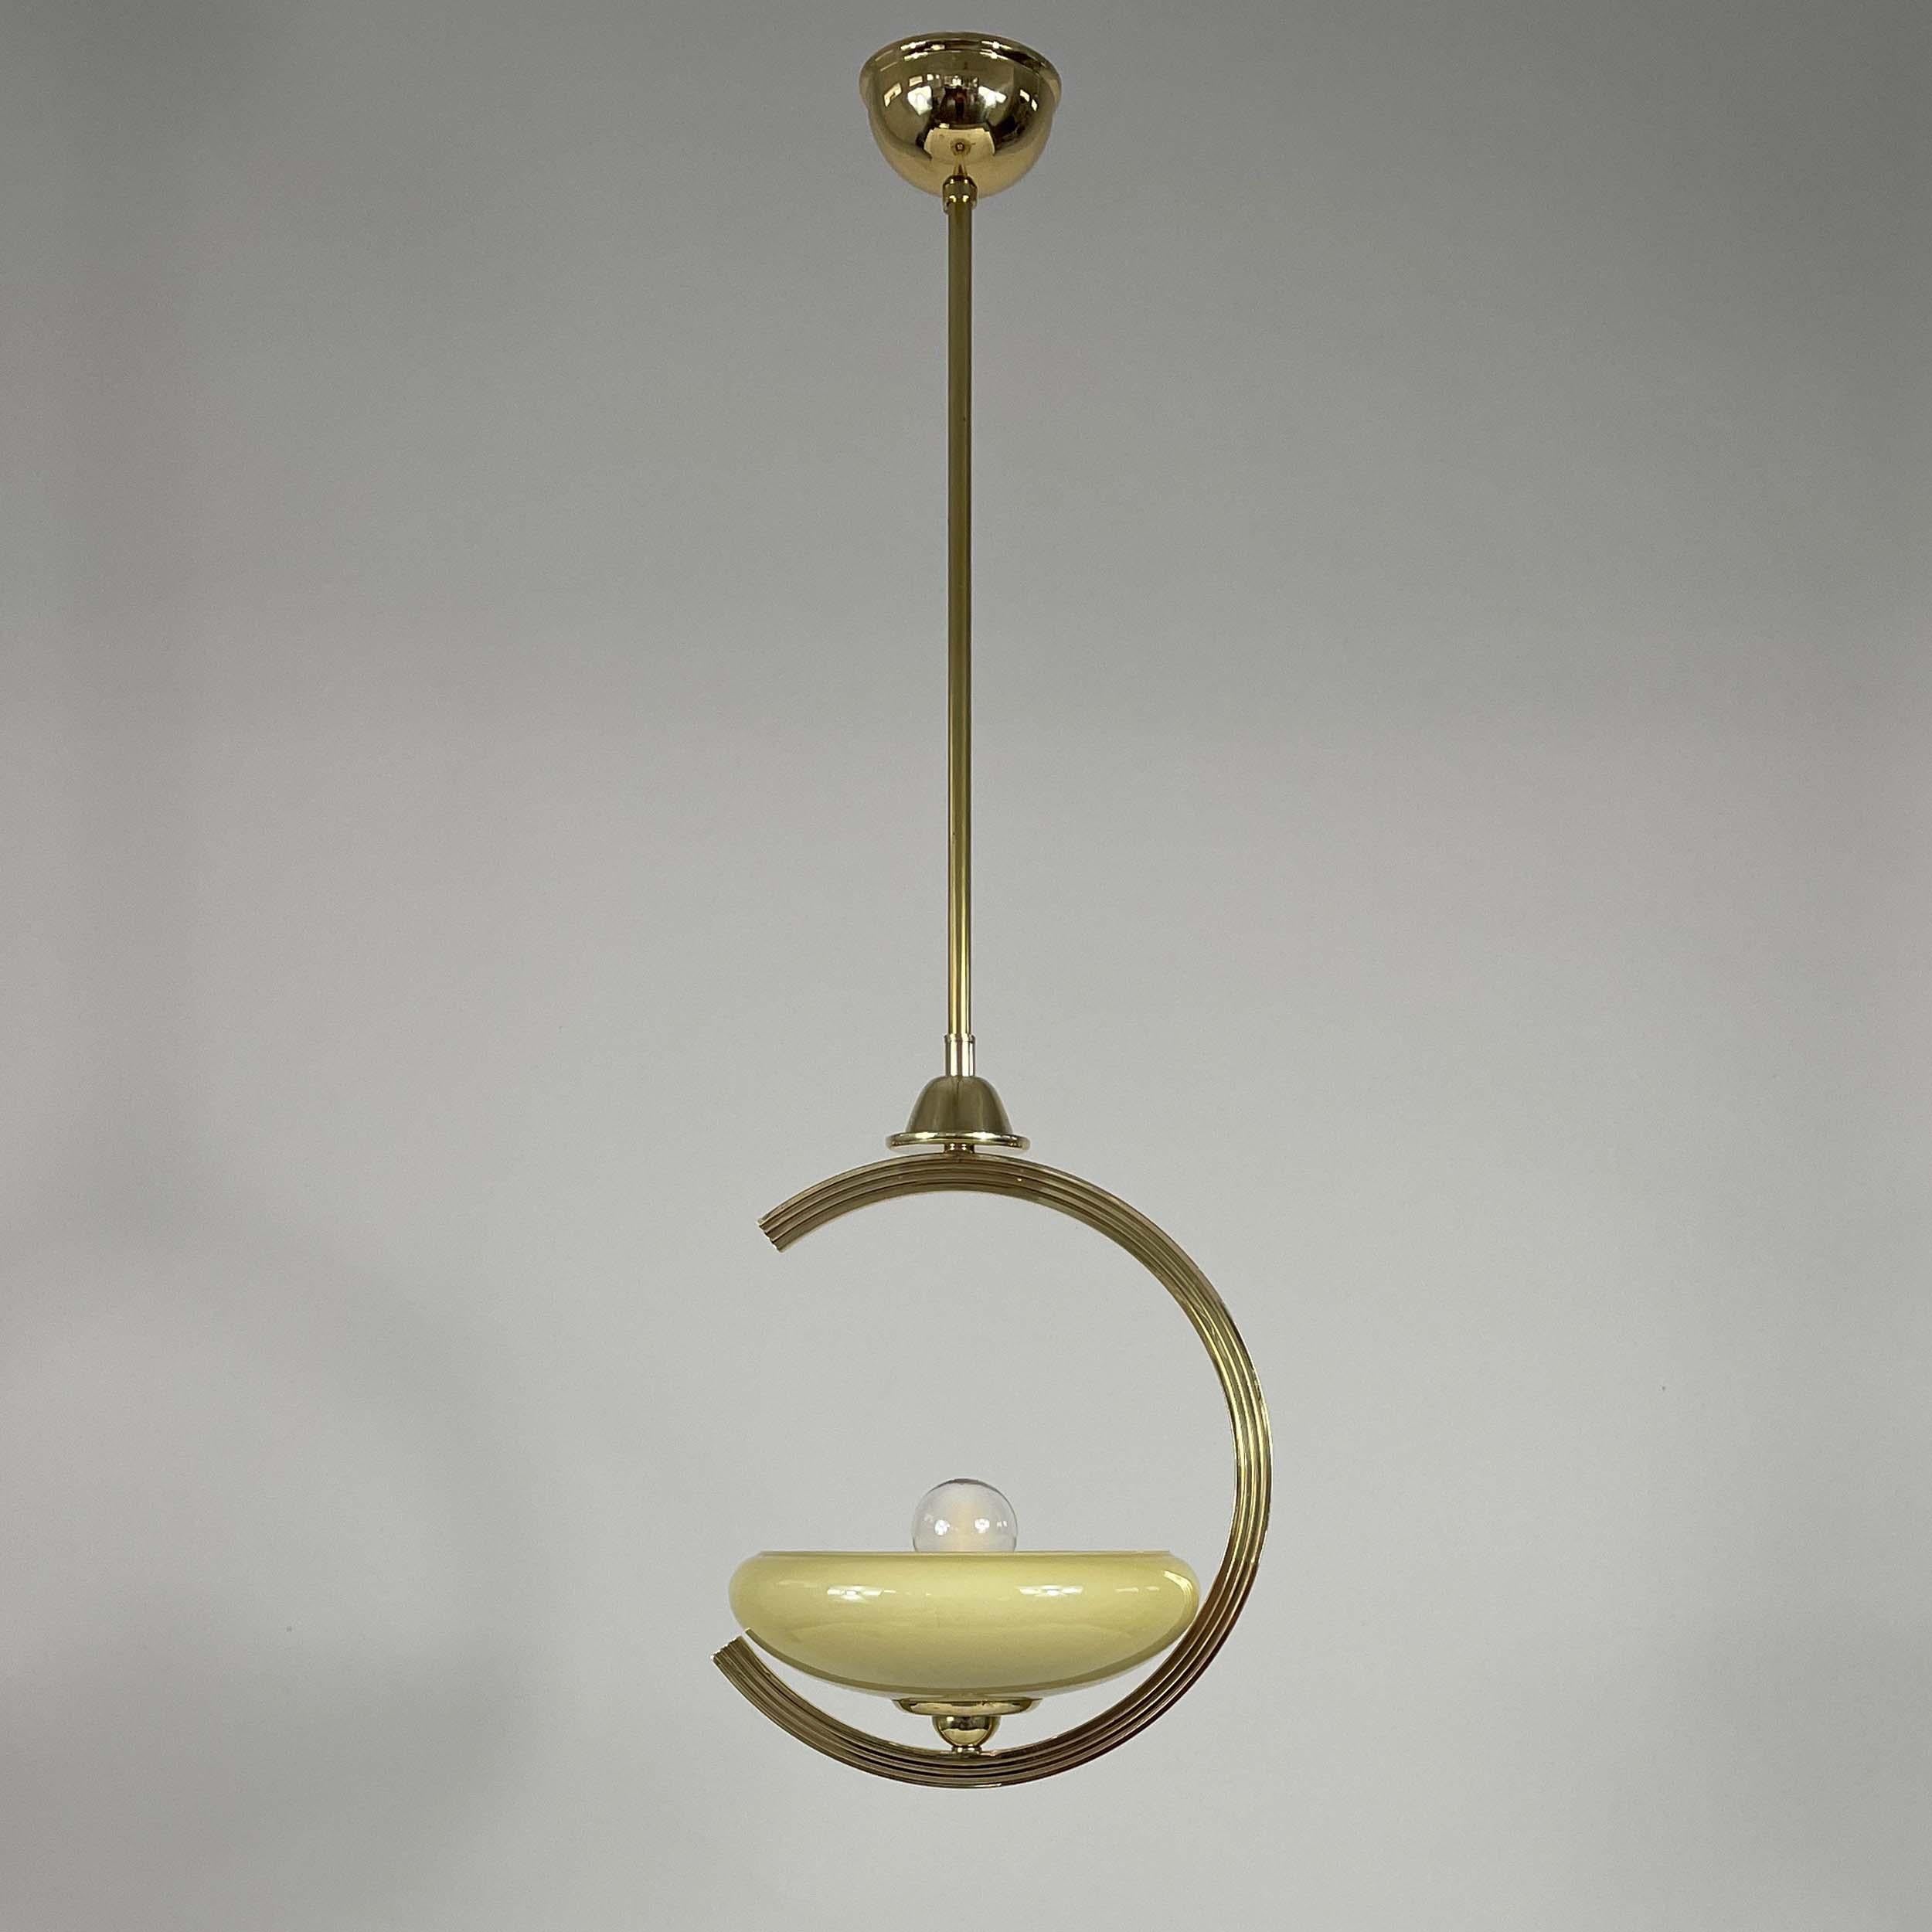 This pendant light was designed and manufactured in Sweden in the 1940s. It features a dark cream / sand colored opaline lampshade and brass hardware.

Measurements:
Total height 30